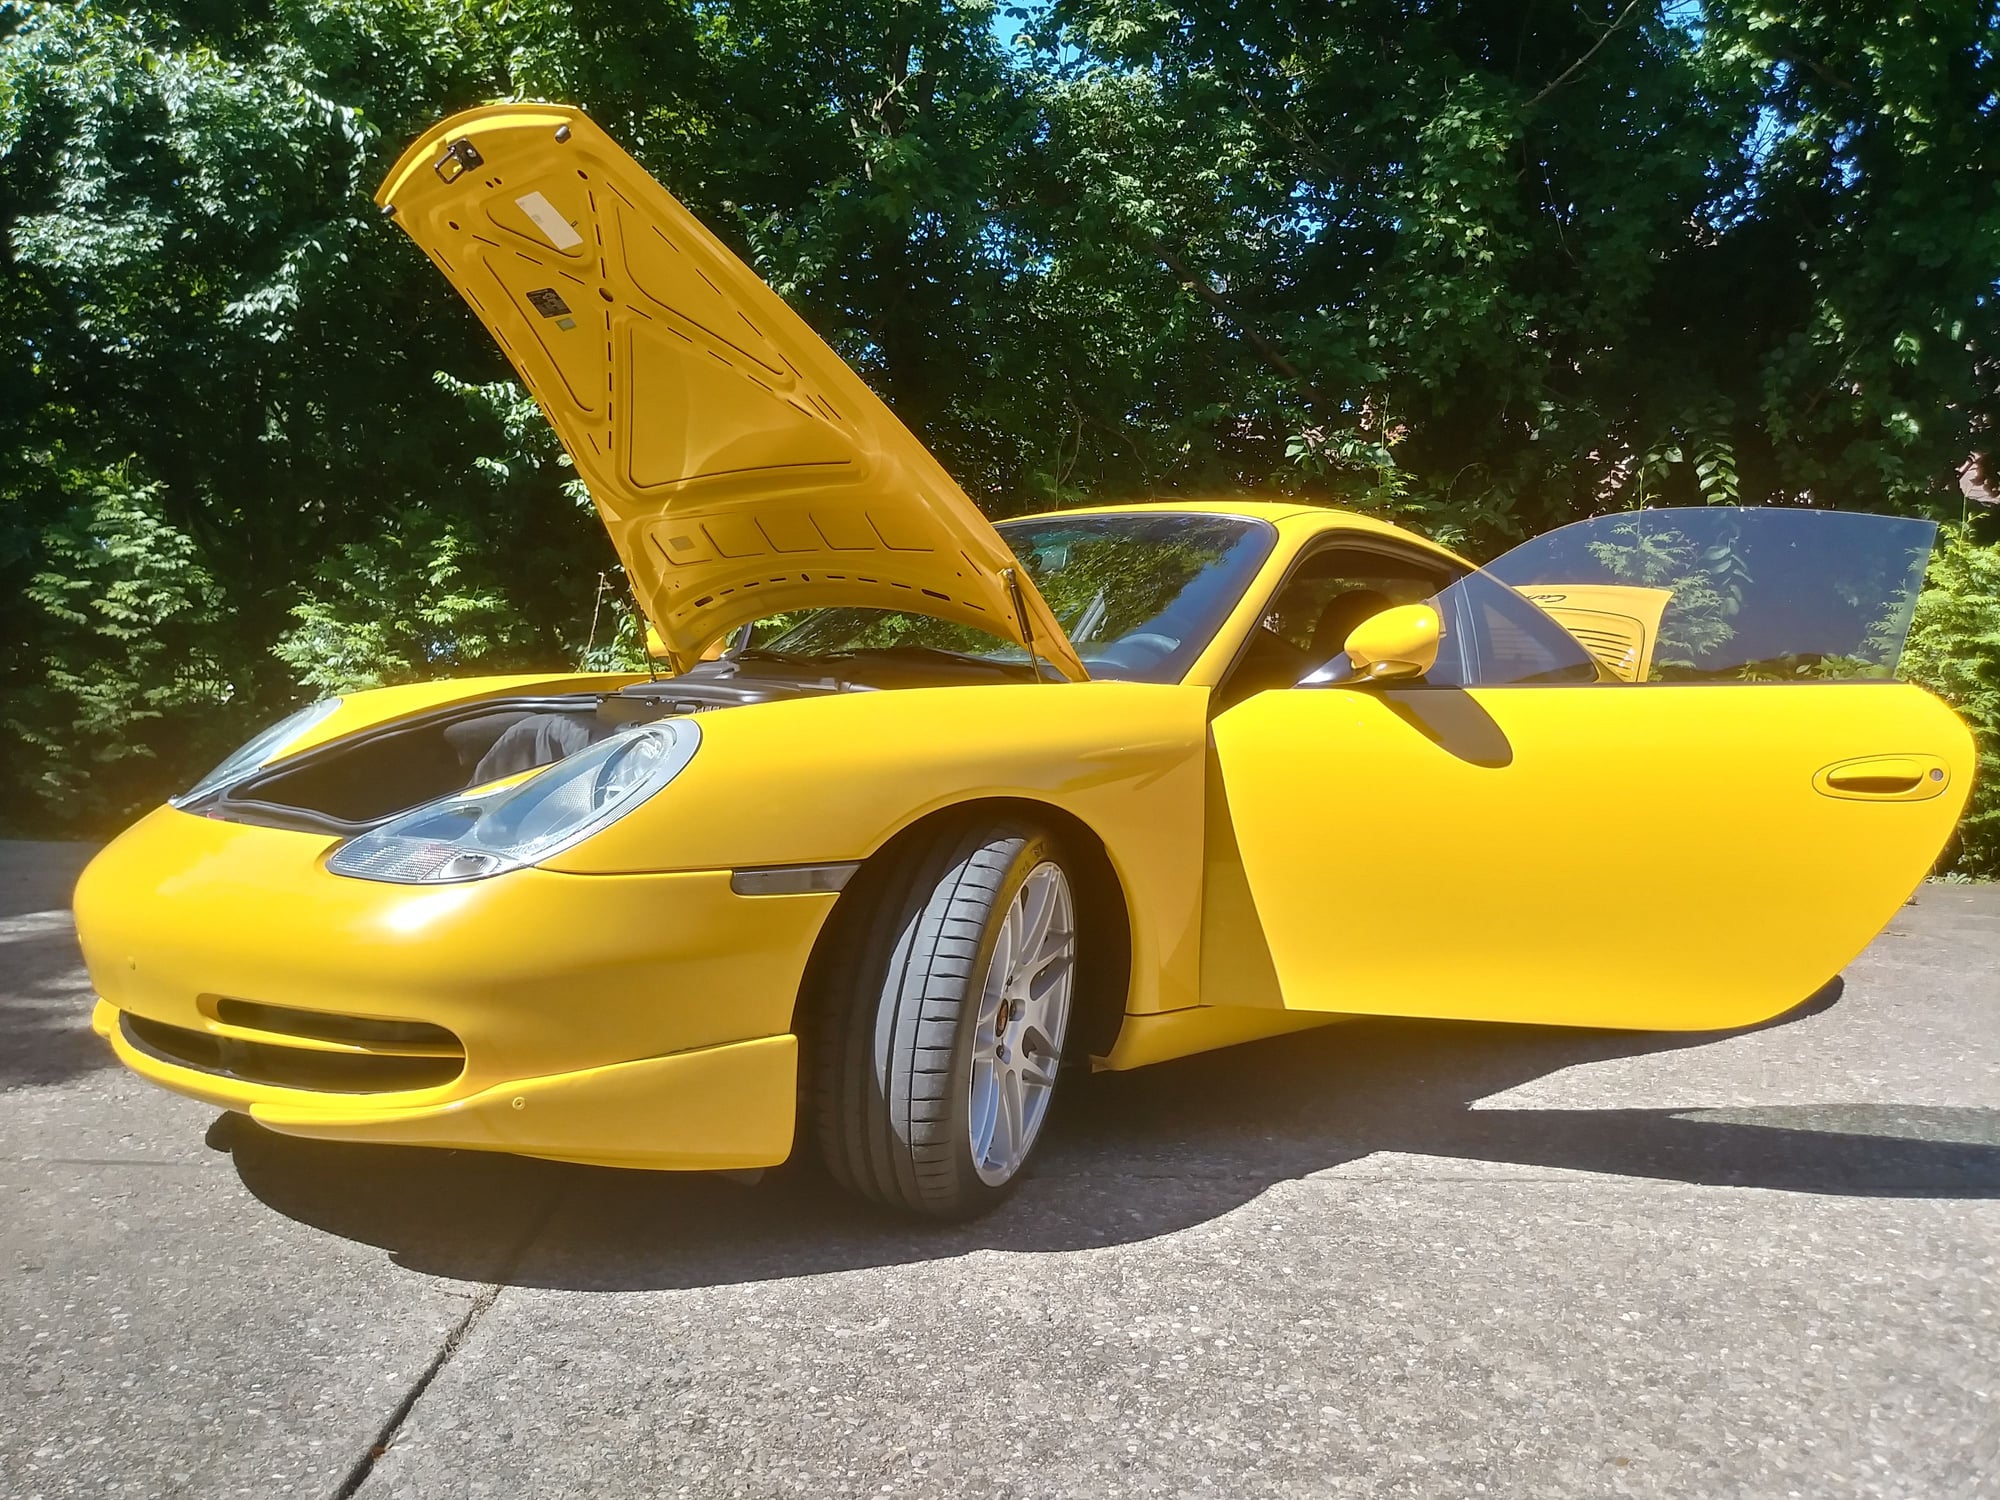 2001 Porsche 911 - 2001 Porsche 996 Carrera-Outstanding- All Services and Docs- Clean Carfax & Title - Used - VIN wp0aa29951s620802 - 50,075 Miles - 6 cyl - 2WD - Manual - Coupe - Yellow - Cincinnati, OH 45245, United States